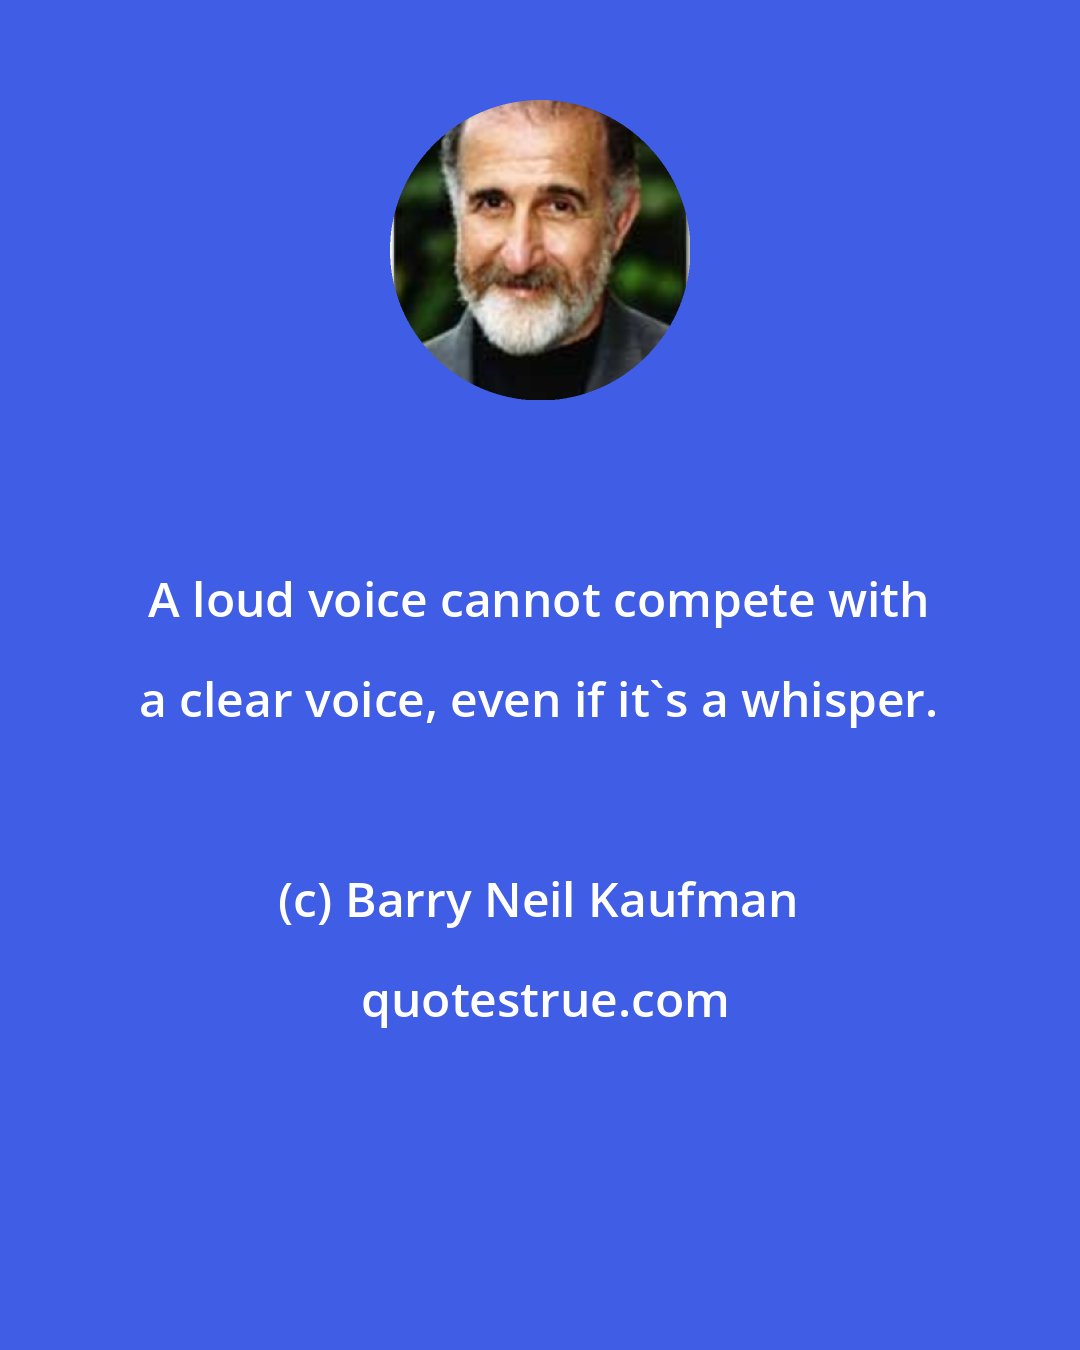 Barry Neil Kaufman: A loud voice cannot compete with a clear voice, even if it's a whisper.